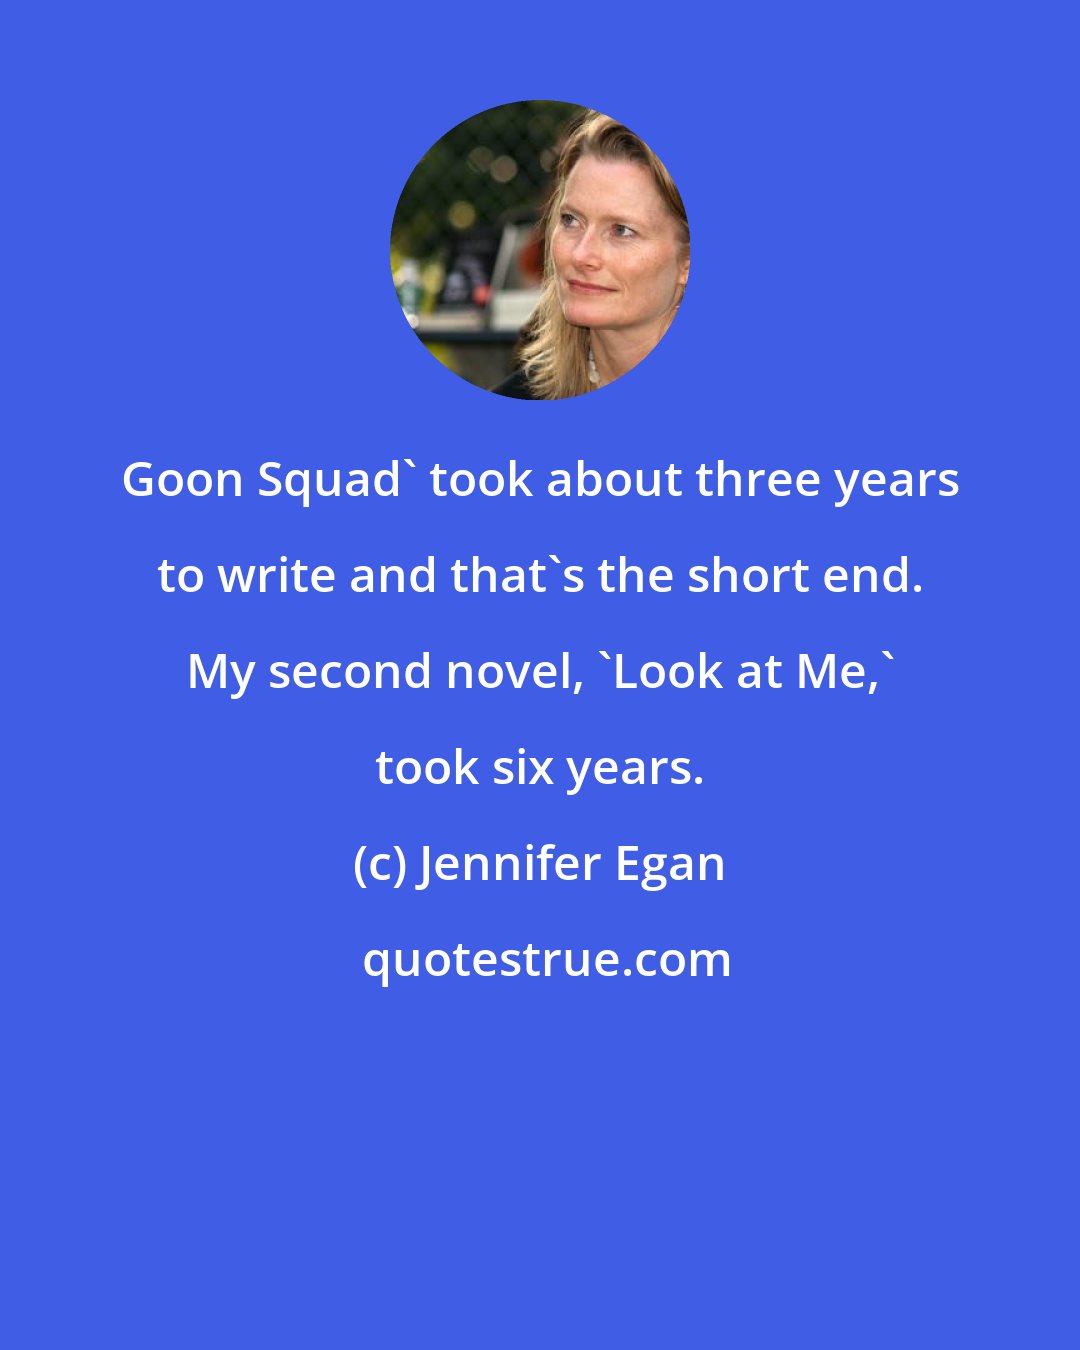 Jennifer Egan: Goon Squad' took about three years to write and that's the short end. My second novel, 'Look at Me,' took six years.